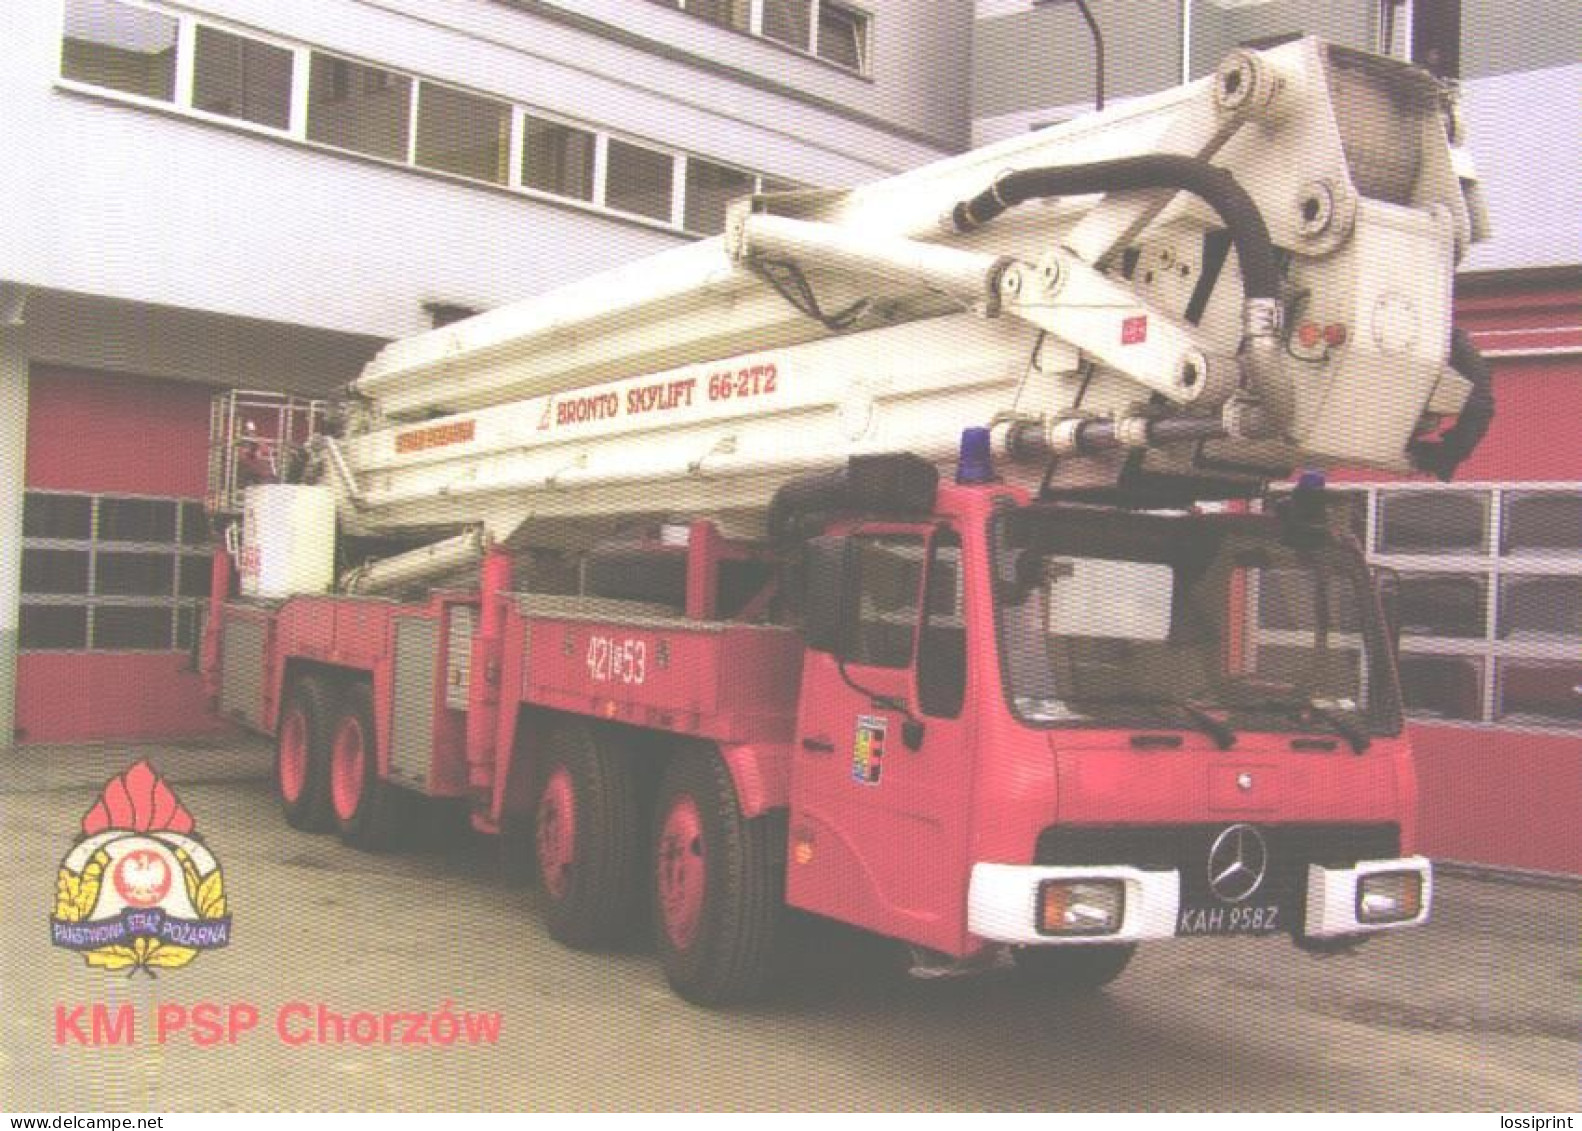 Fire Engine Mercedes Benz 4428 With Bronto Skylift 66-2T2 - Camion, Tir